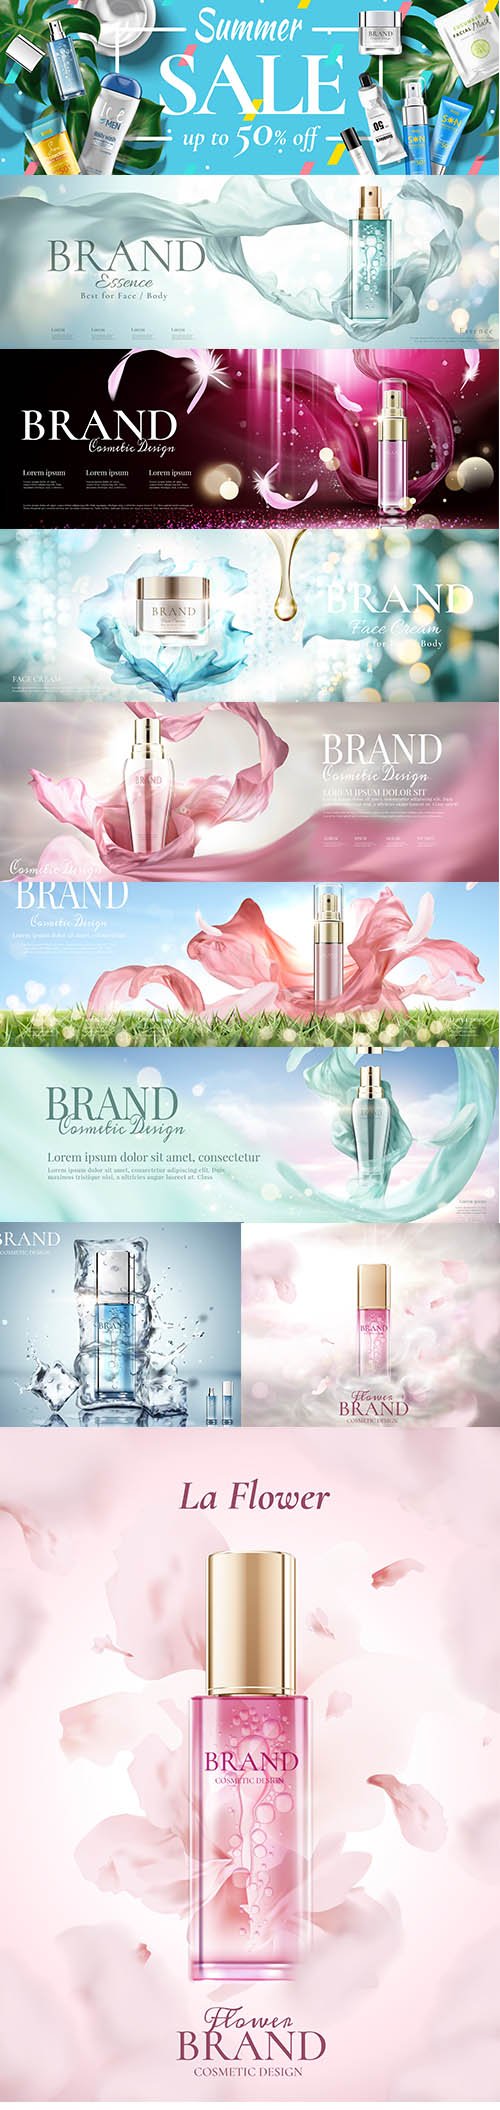 Cosmetic banner ads with bottle vol 2